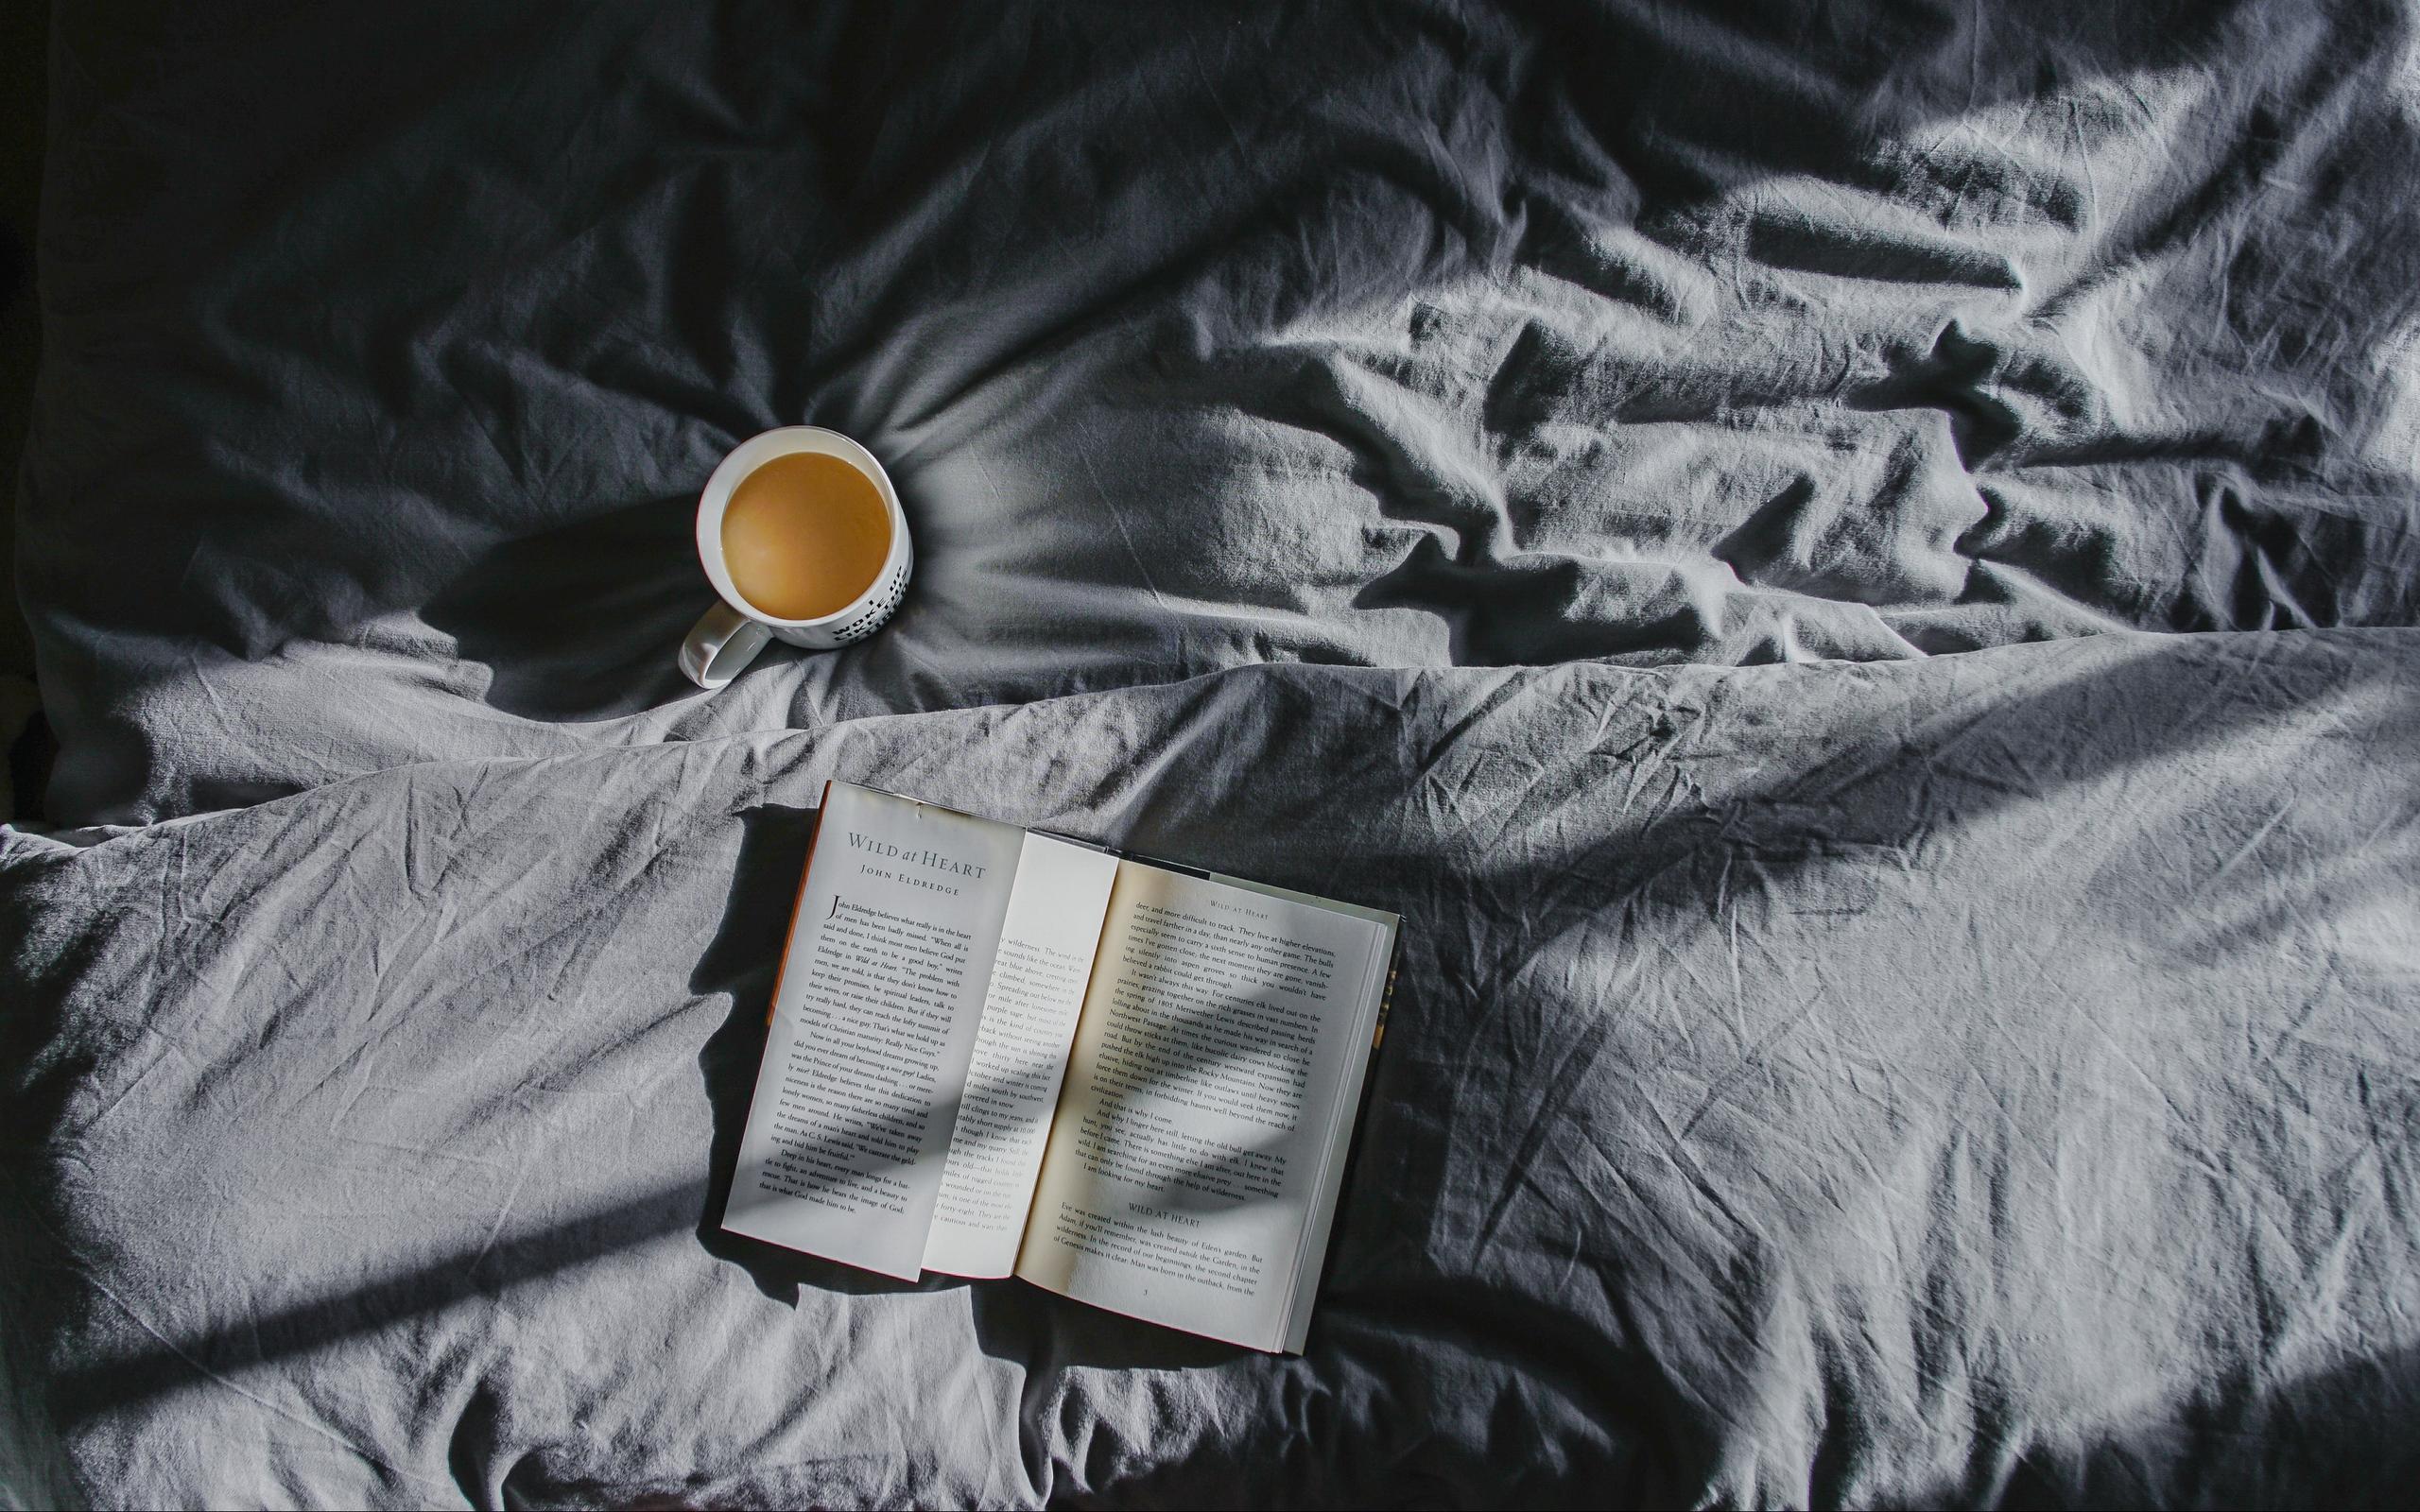 Download wallpaper 2560x1600 book, coffee, bed, shadow